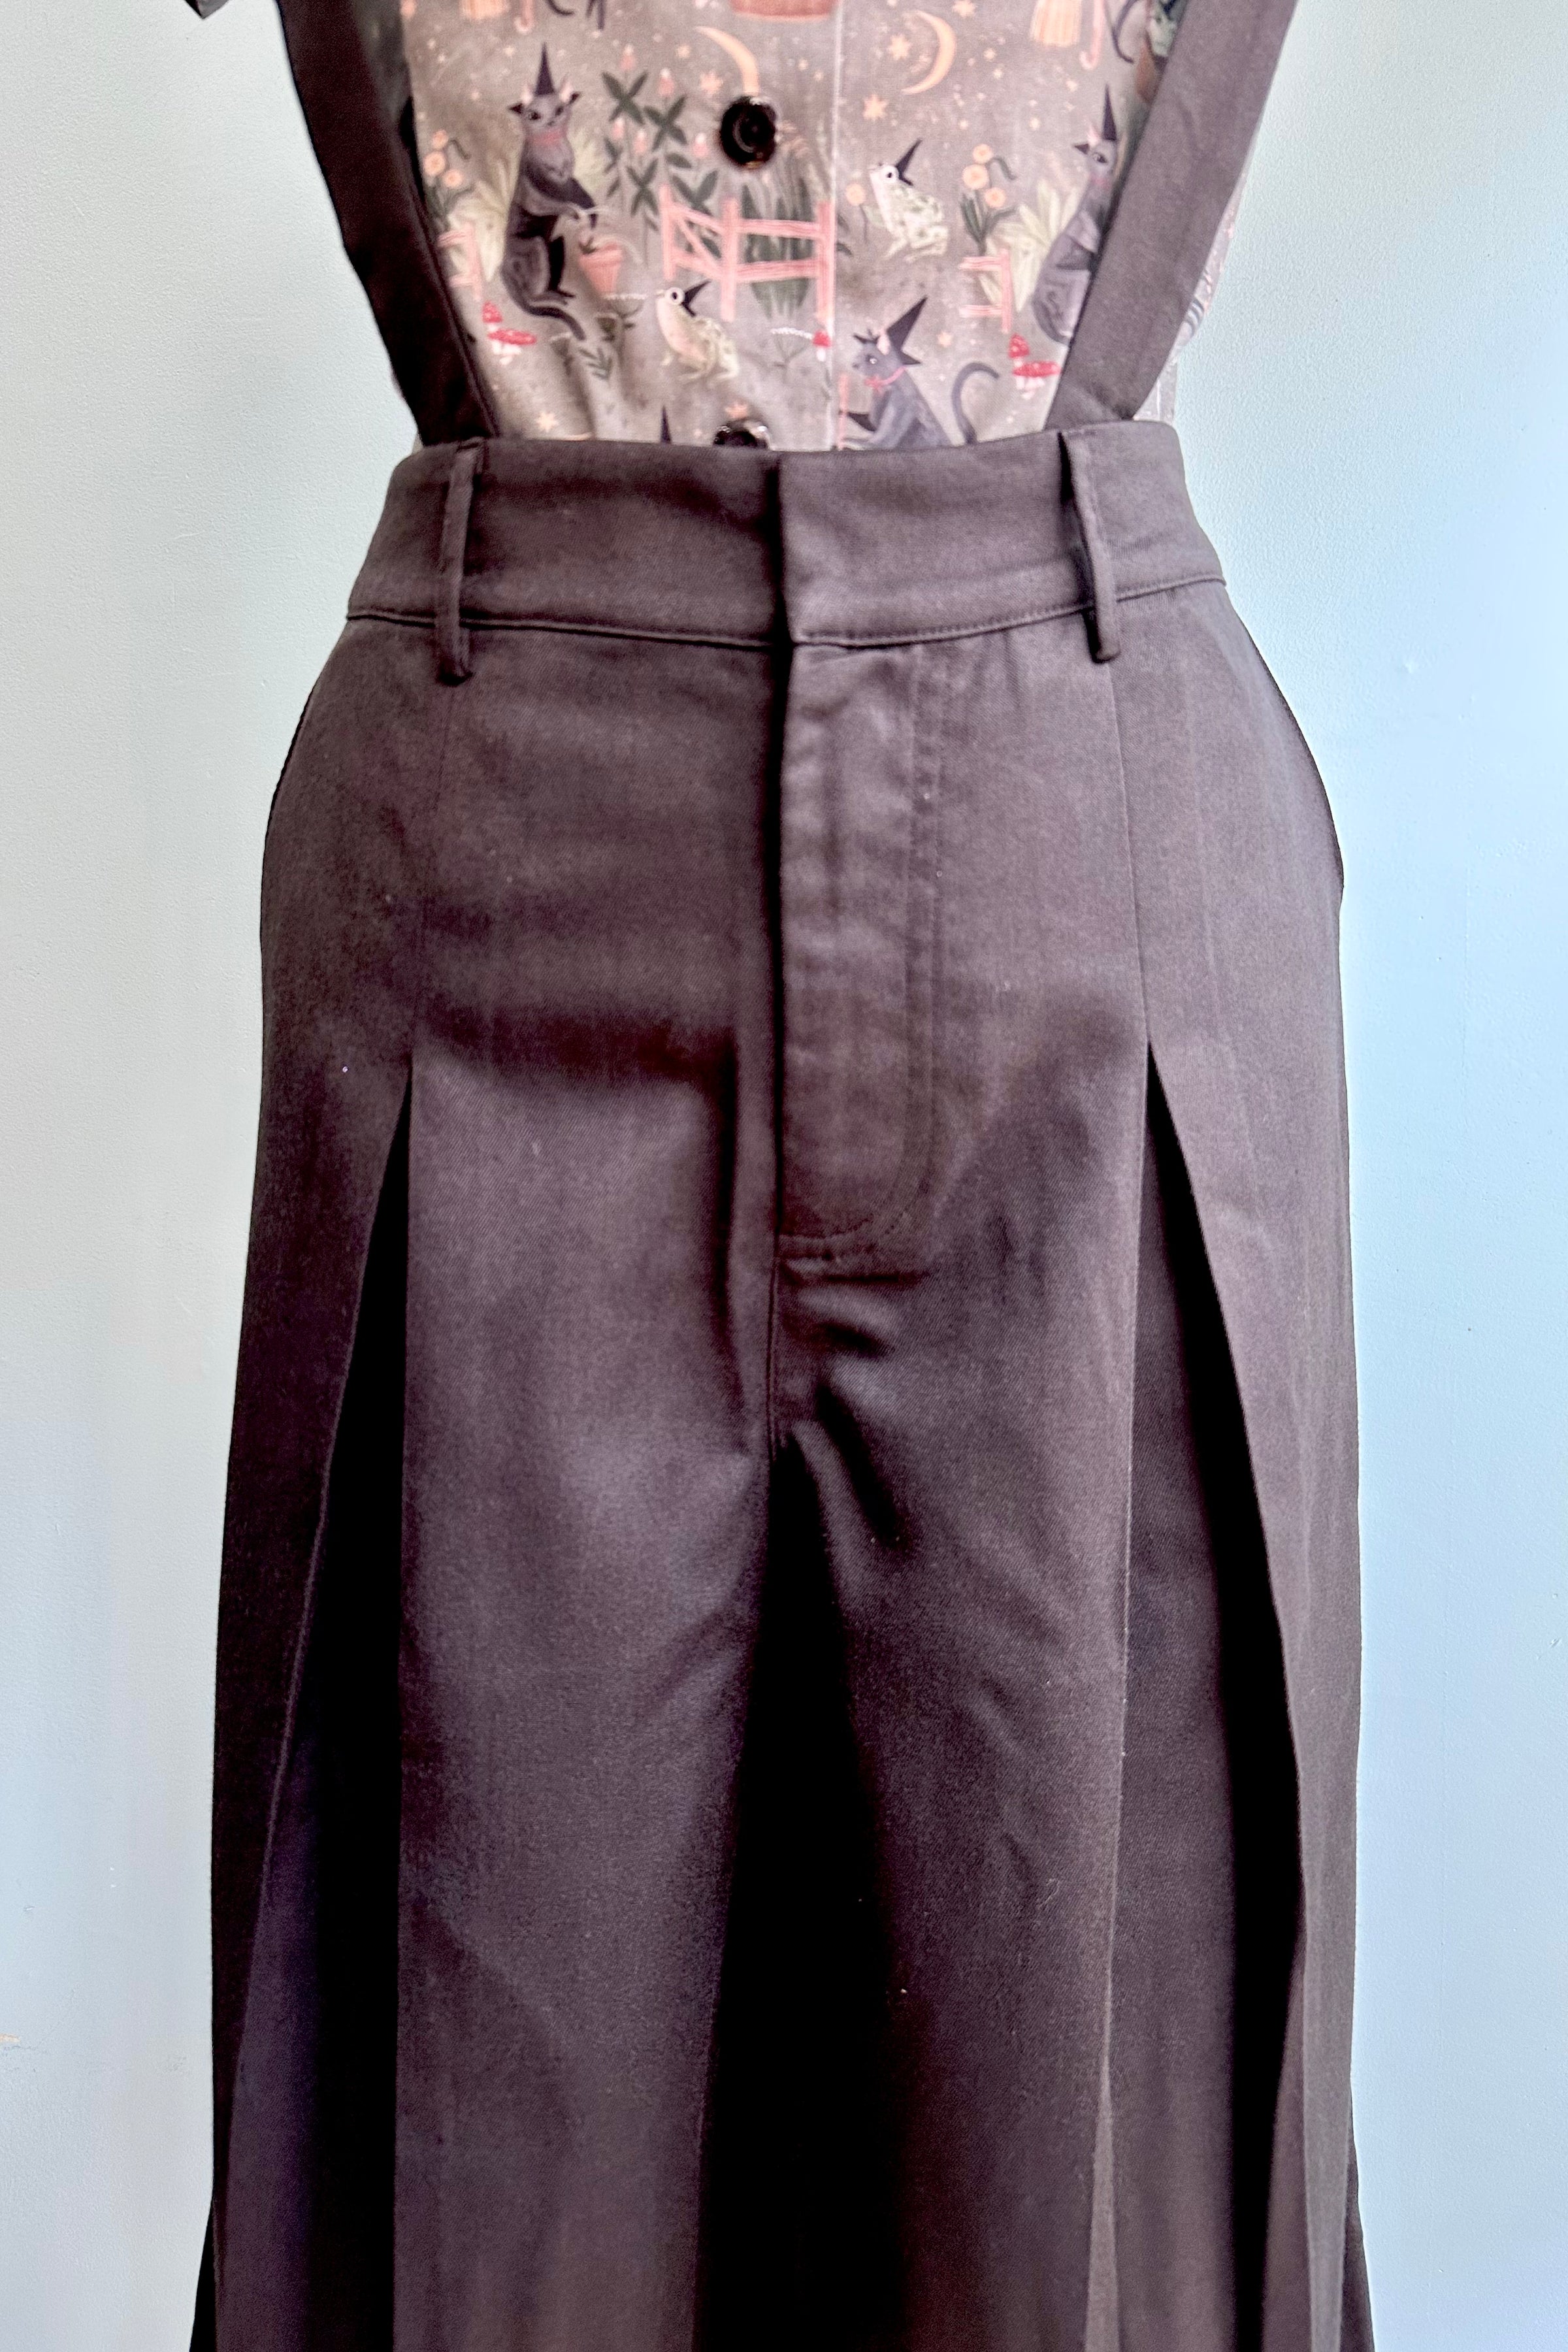 Oh High There Suspender Pants - Limited